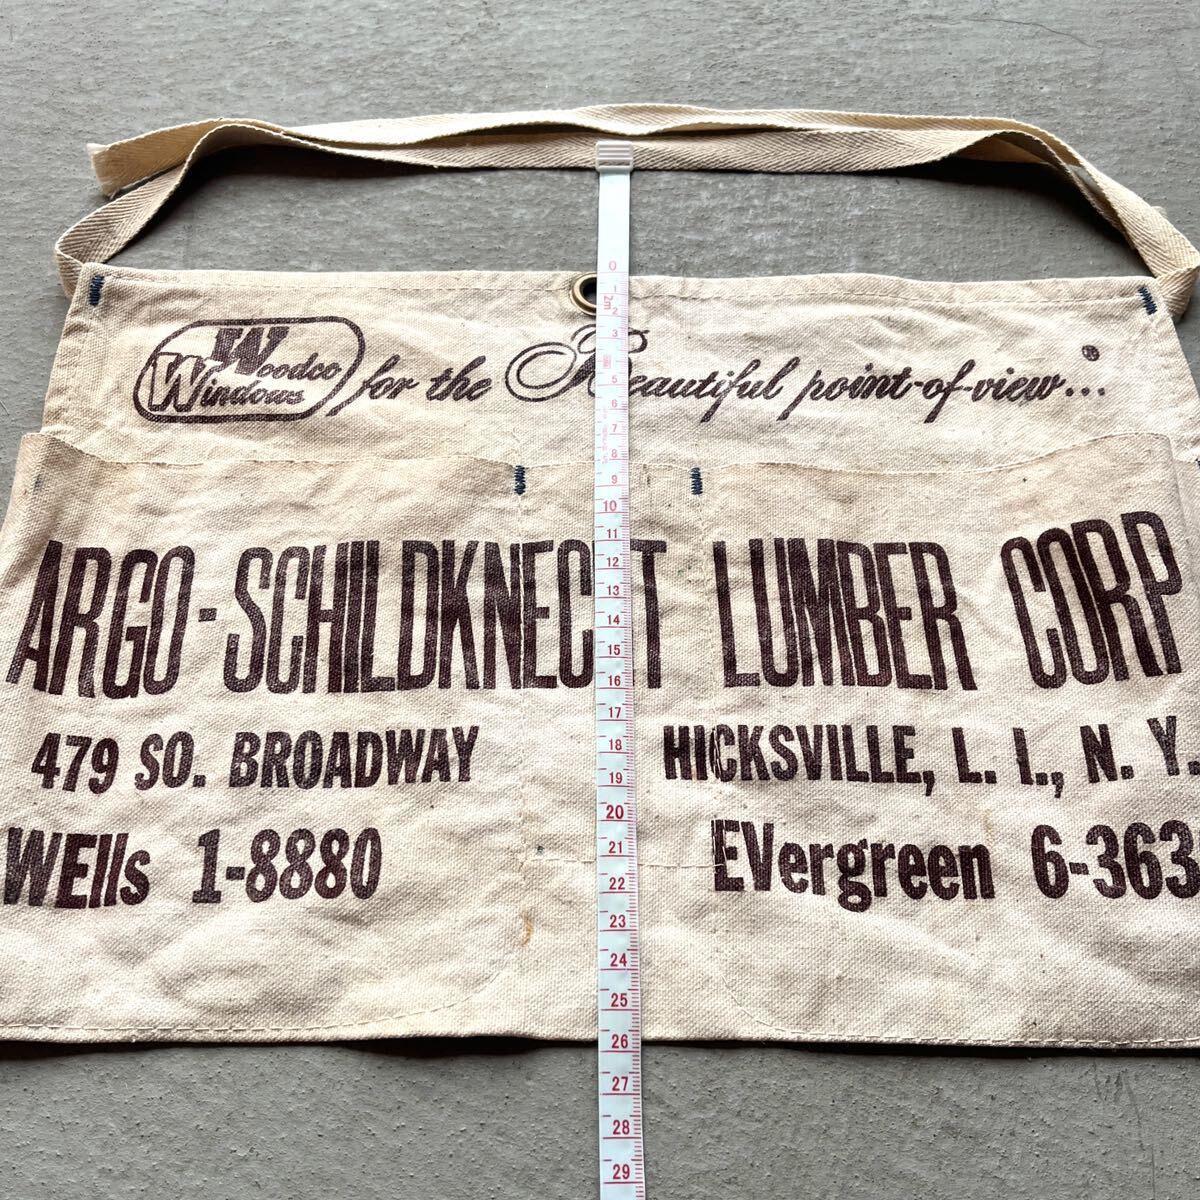  american Vintage 50*s brown group apron Apron interior US miscellaneous goods old clothes LOHAS Cafe gardening camp DIY working clothes apron coffee shop 